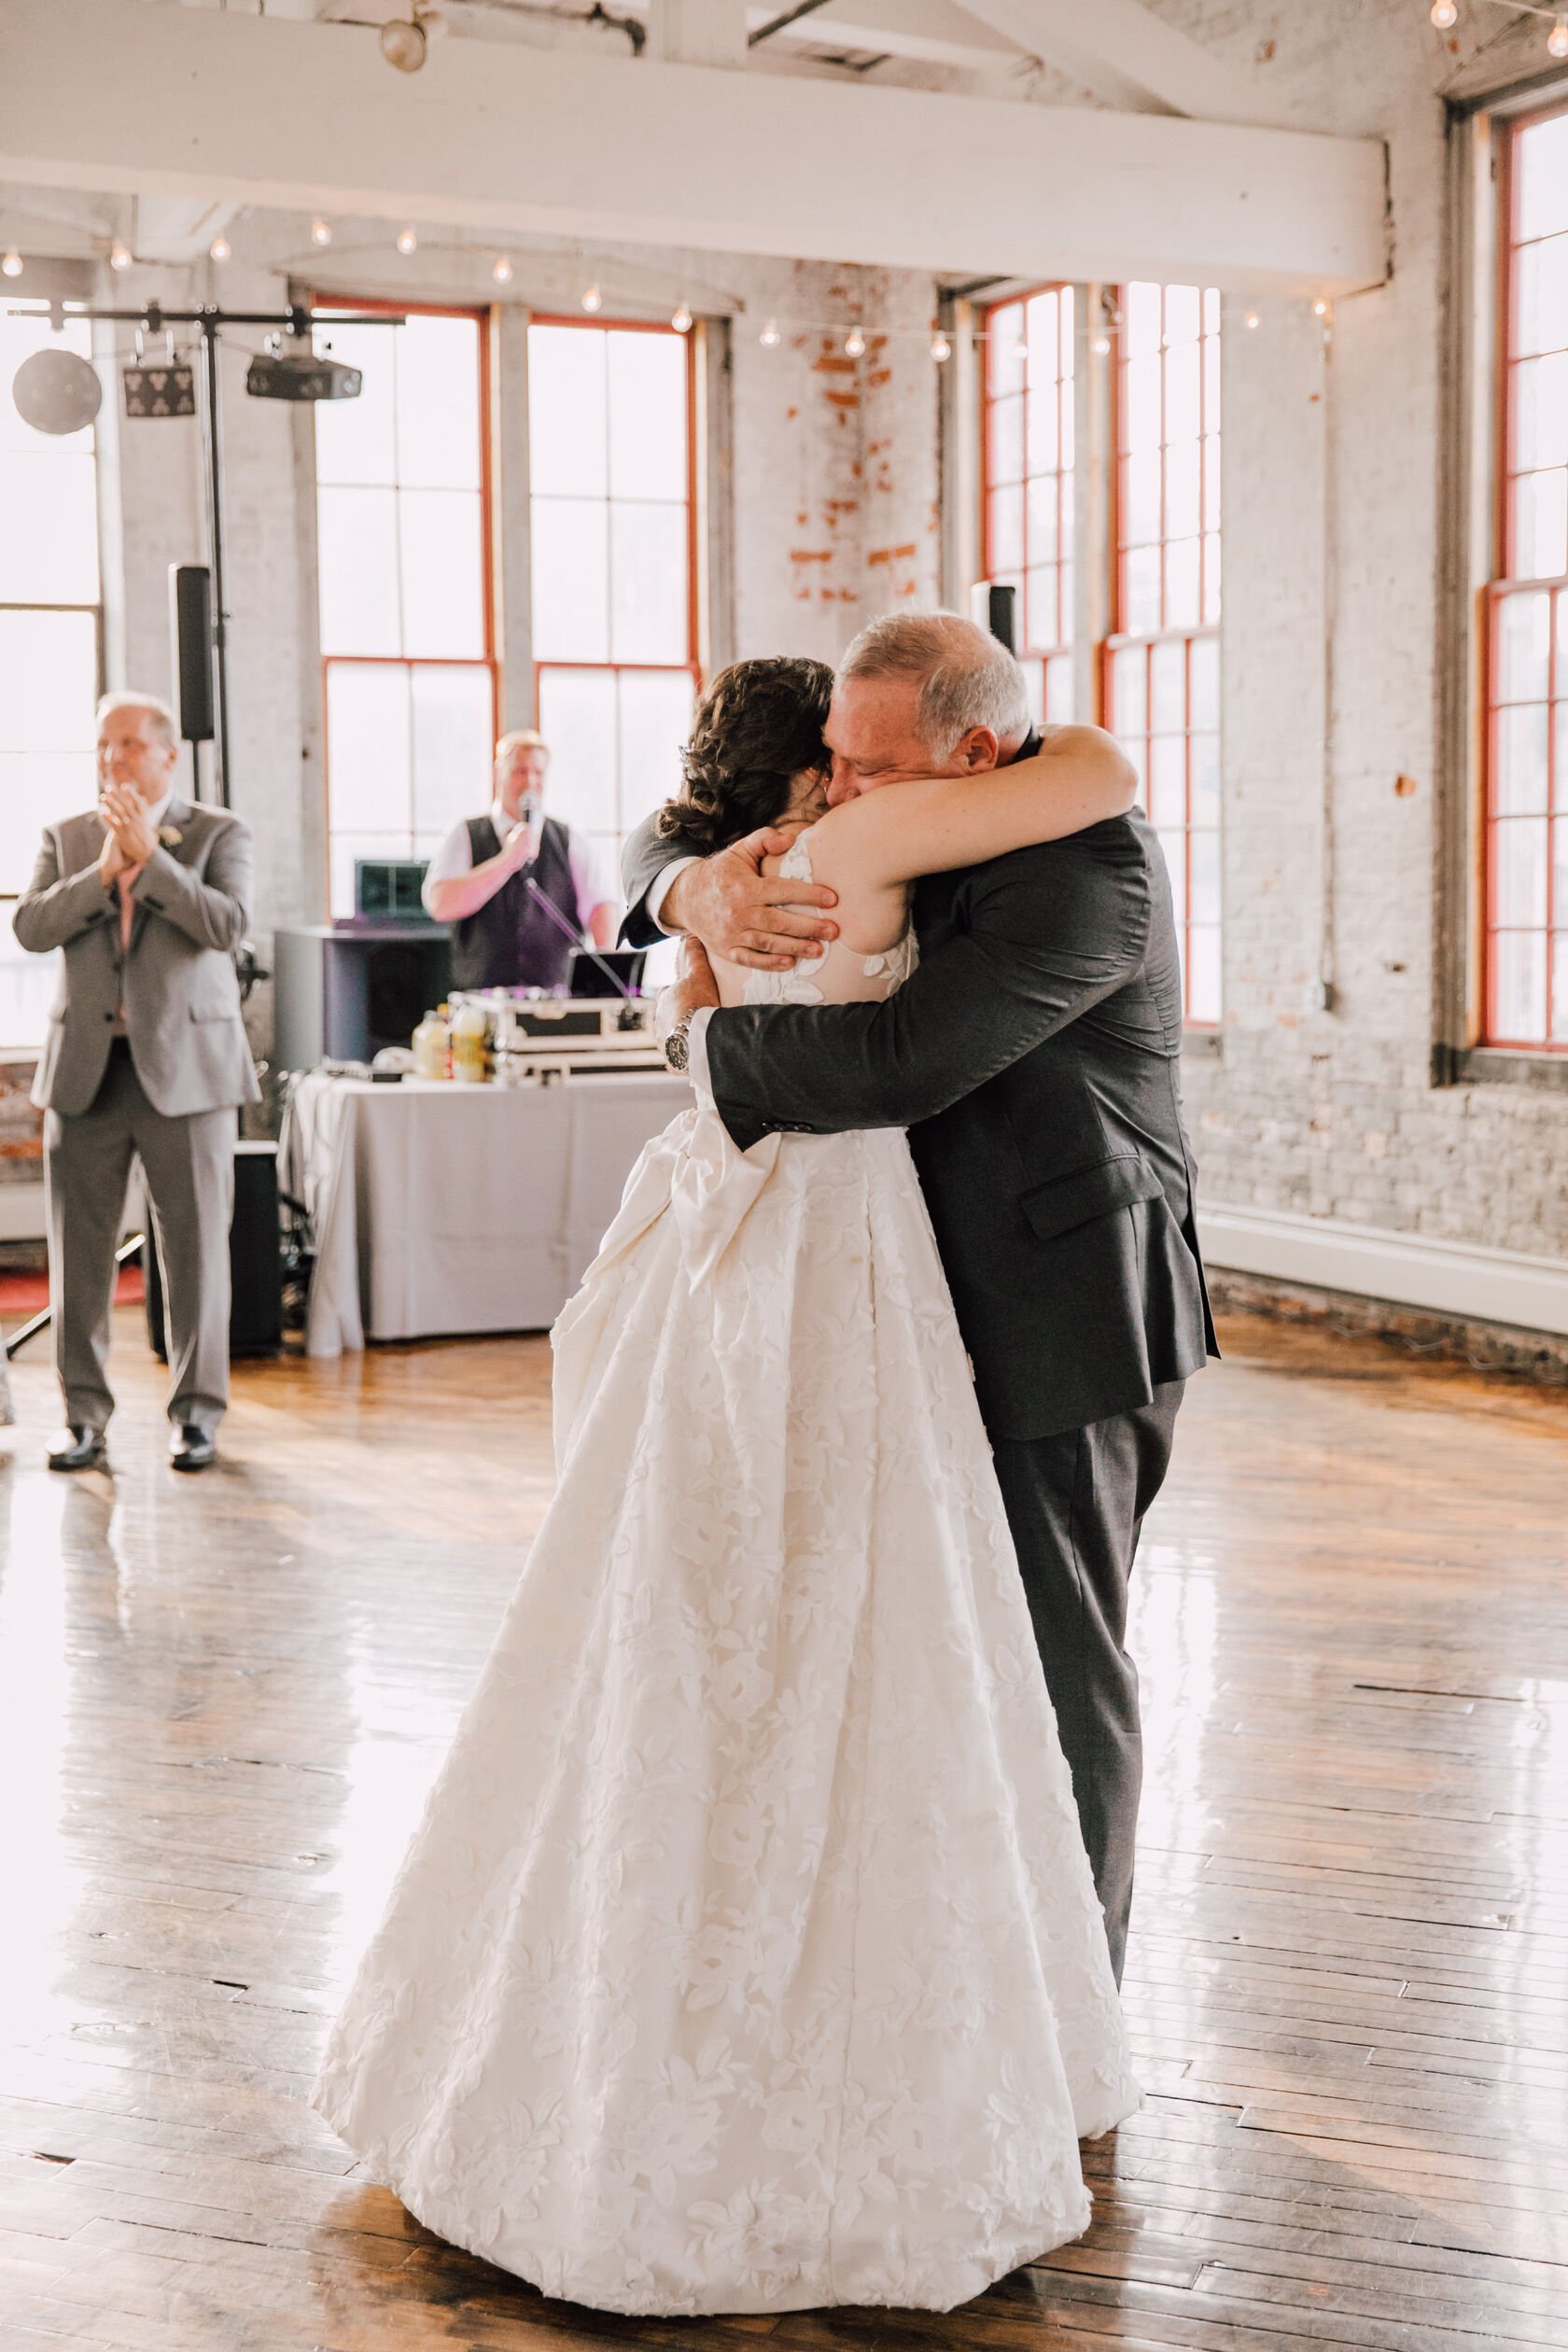  the bride and her father share an emotional dance at her vow renewal 